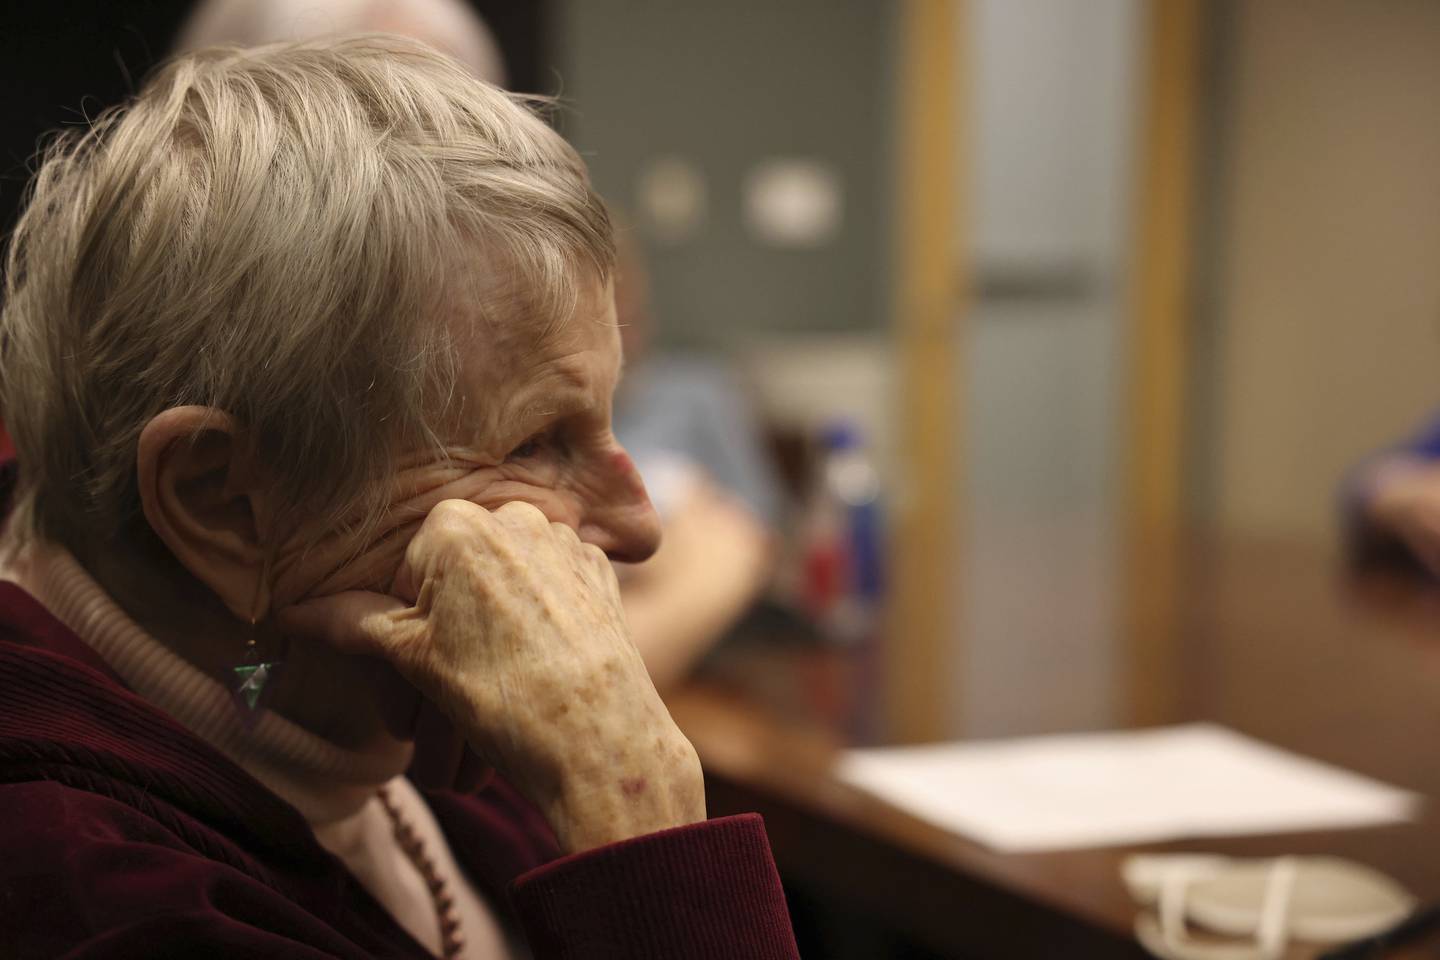 Nora Natof, 87, listens to a conversation on death and dying with the End of Life Chicago company at the Oak Park library on Dec. 11, 2022. Natof spoke of her mother and grandparents dying and how ritual in the dying process was not encouraged at all.